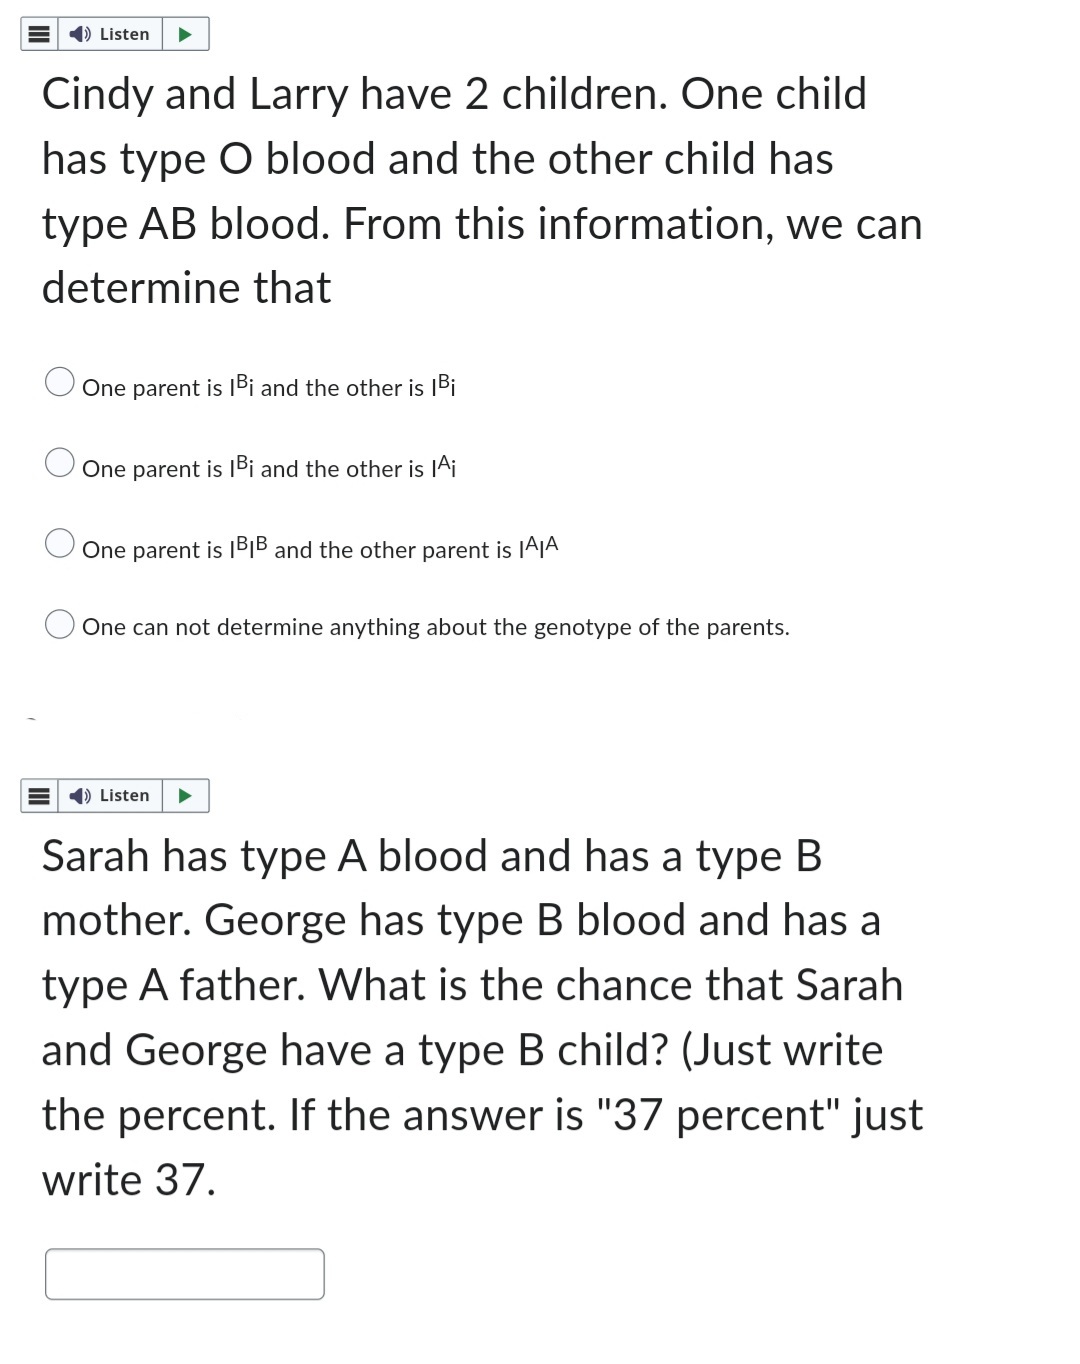 ➡ Listen
Cindy and Larry have 2 children. One child
has type O blood and the other child has
type AB blood. From this information, we can
determine that
One parent is IBi and the other is |Bi
One parent is IBi and the other is Ai
One parent is IBIB and the other parent is IAIA
One can not determine anything about the genotype of the parents.
➡ Listen
Sarah has type A blood and has a type B
mother. George has type B blood and has a
type A father. What is the chance that Sarah
and George have a type B child? (Just write
the percent. If the answer is "37 percent" just
write 37.